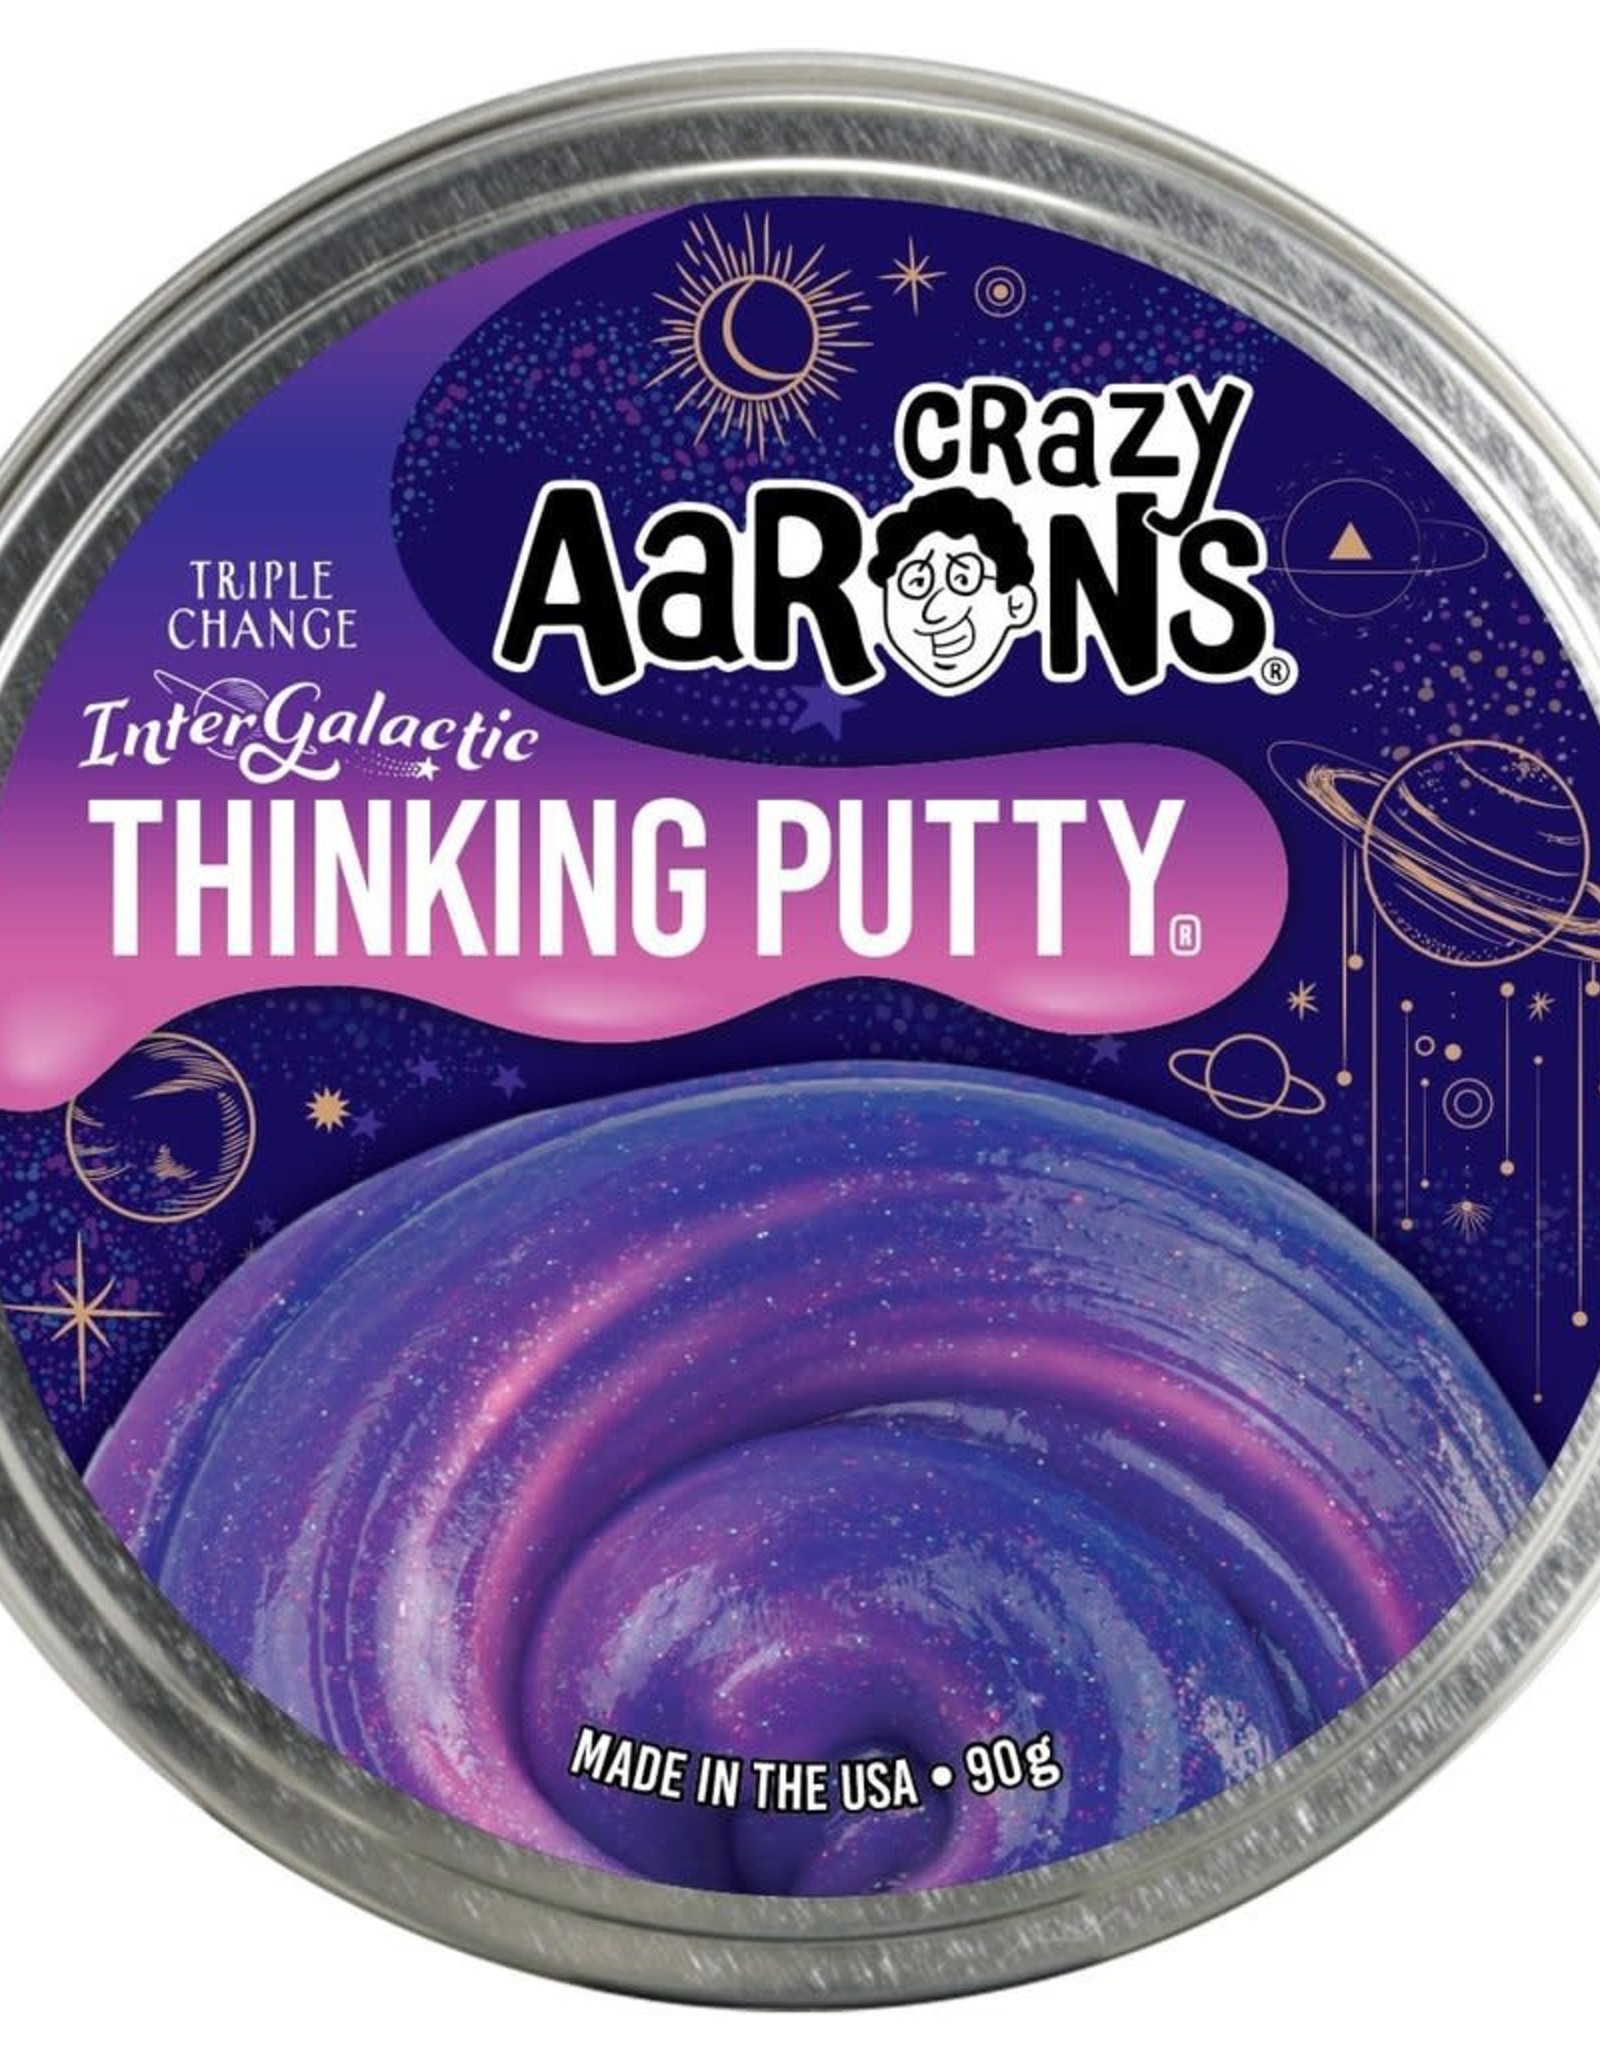 Crazy Aaron's Thinking Putty Crazy Aaron's Trendsetters -